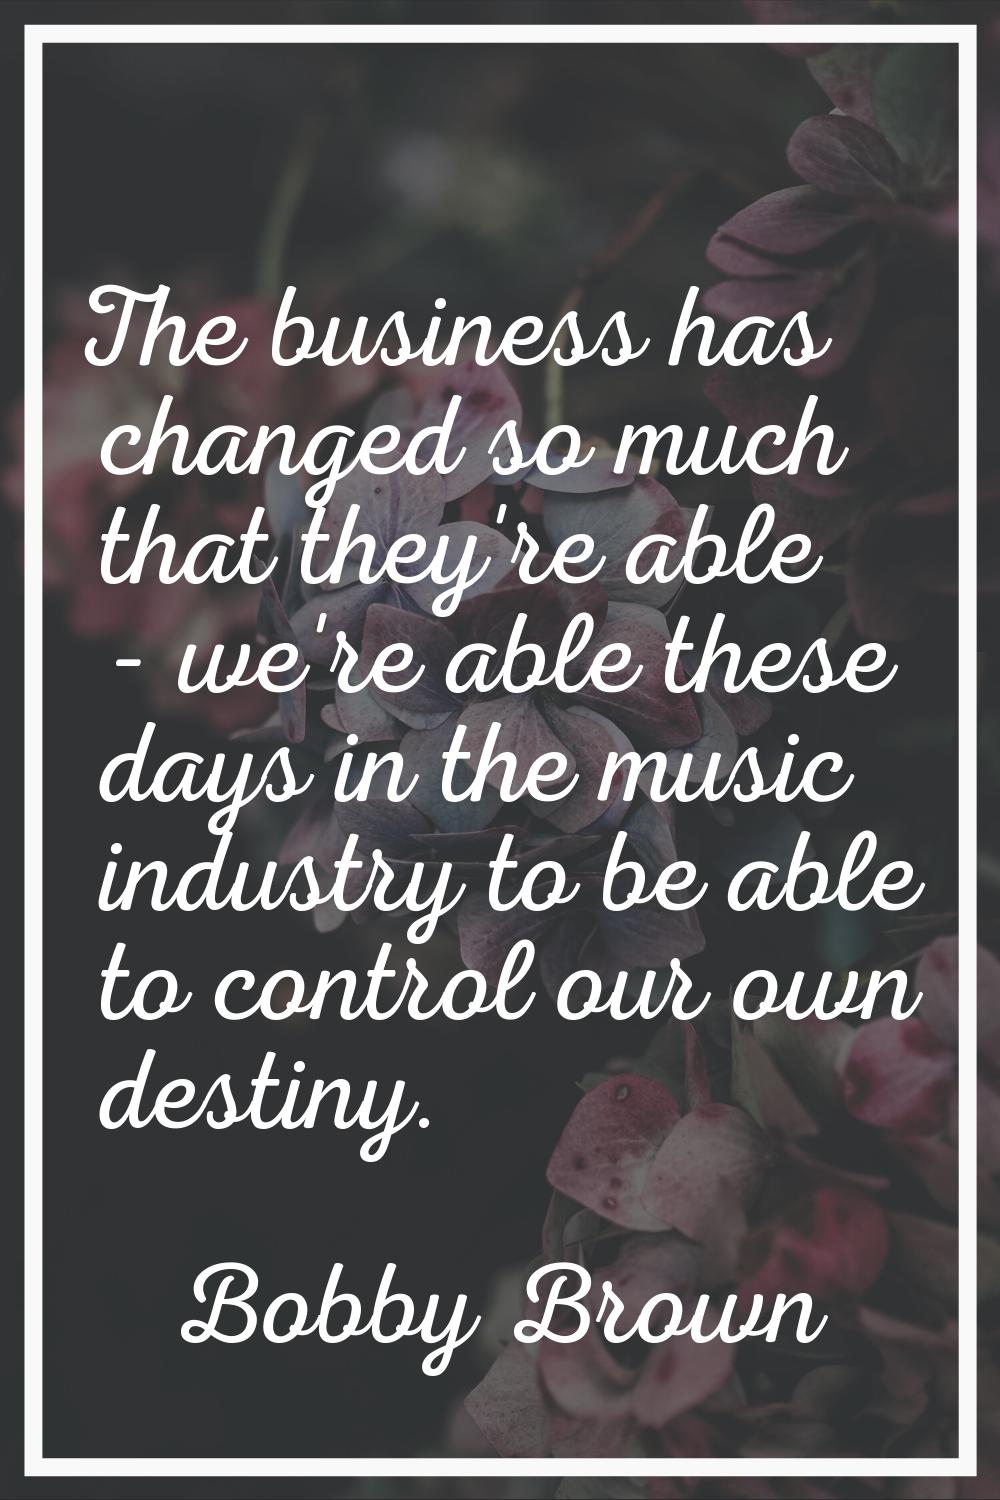 The business has changed so much that they're able - we're able these days in the music industry to